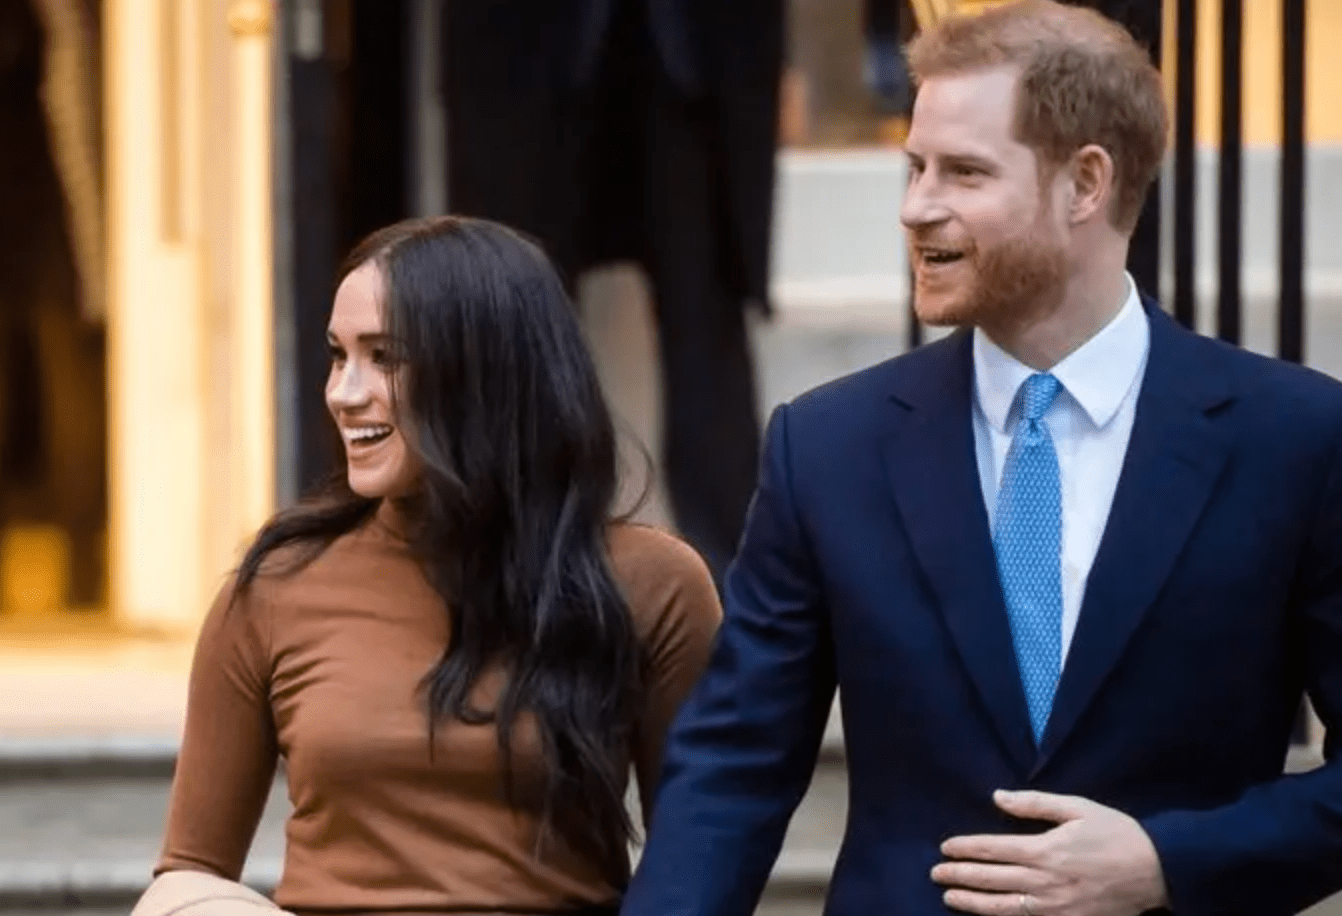 ‘Humiliated’ Prince Harry By Meghan Markle Announcement